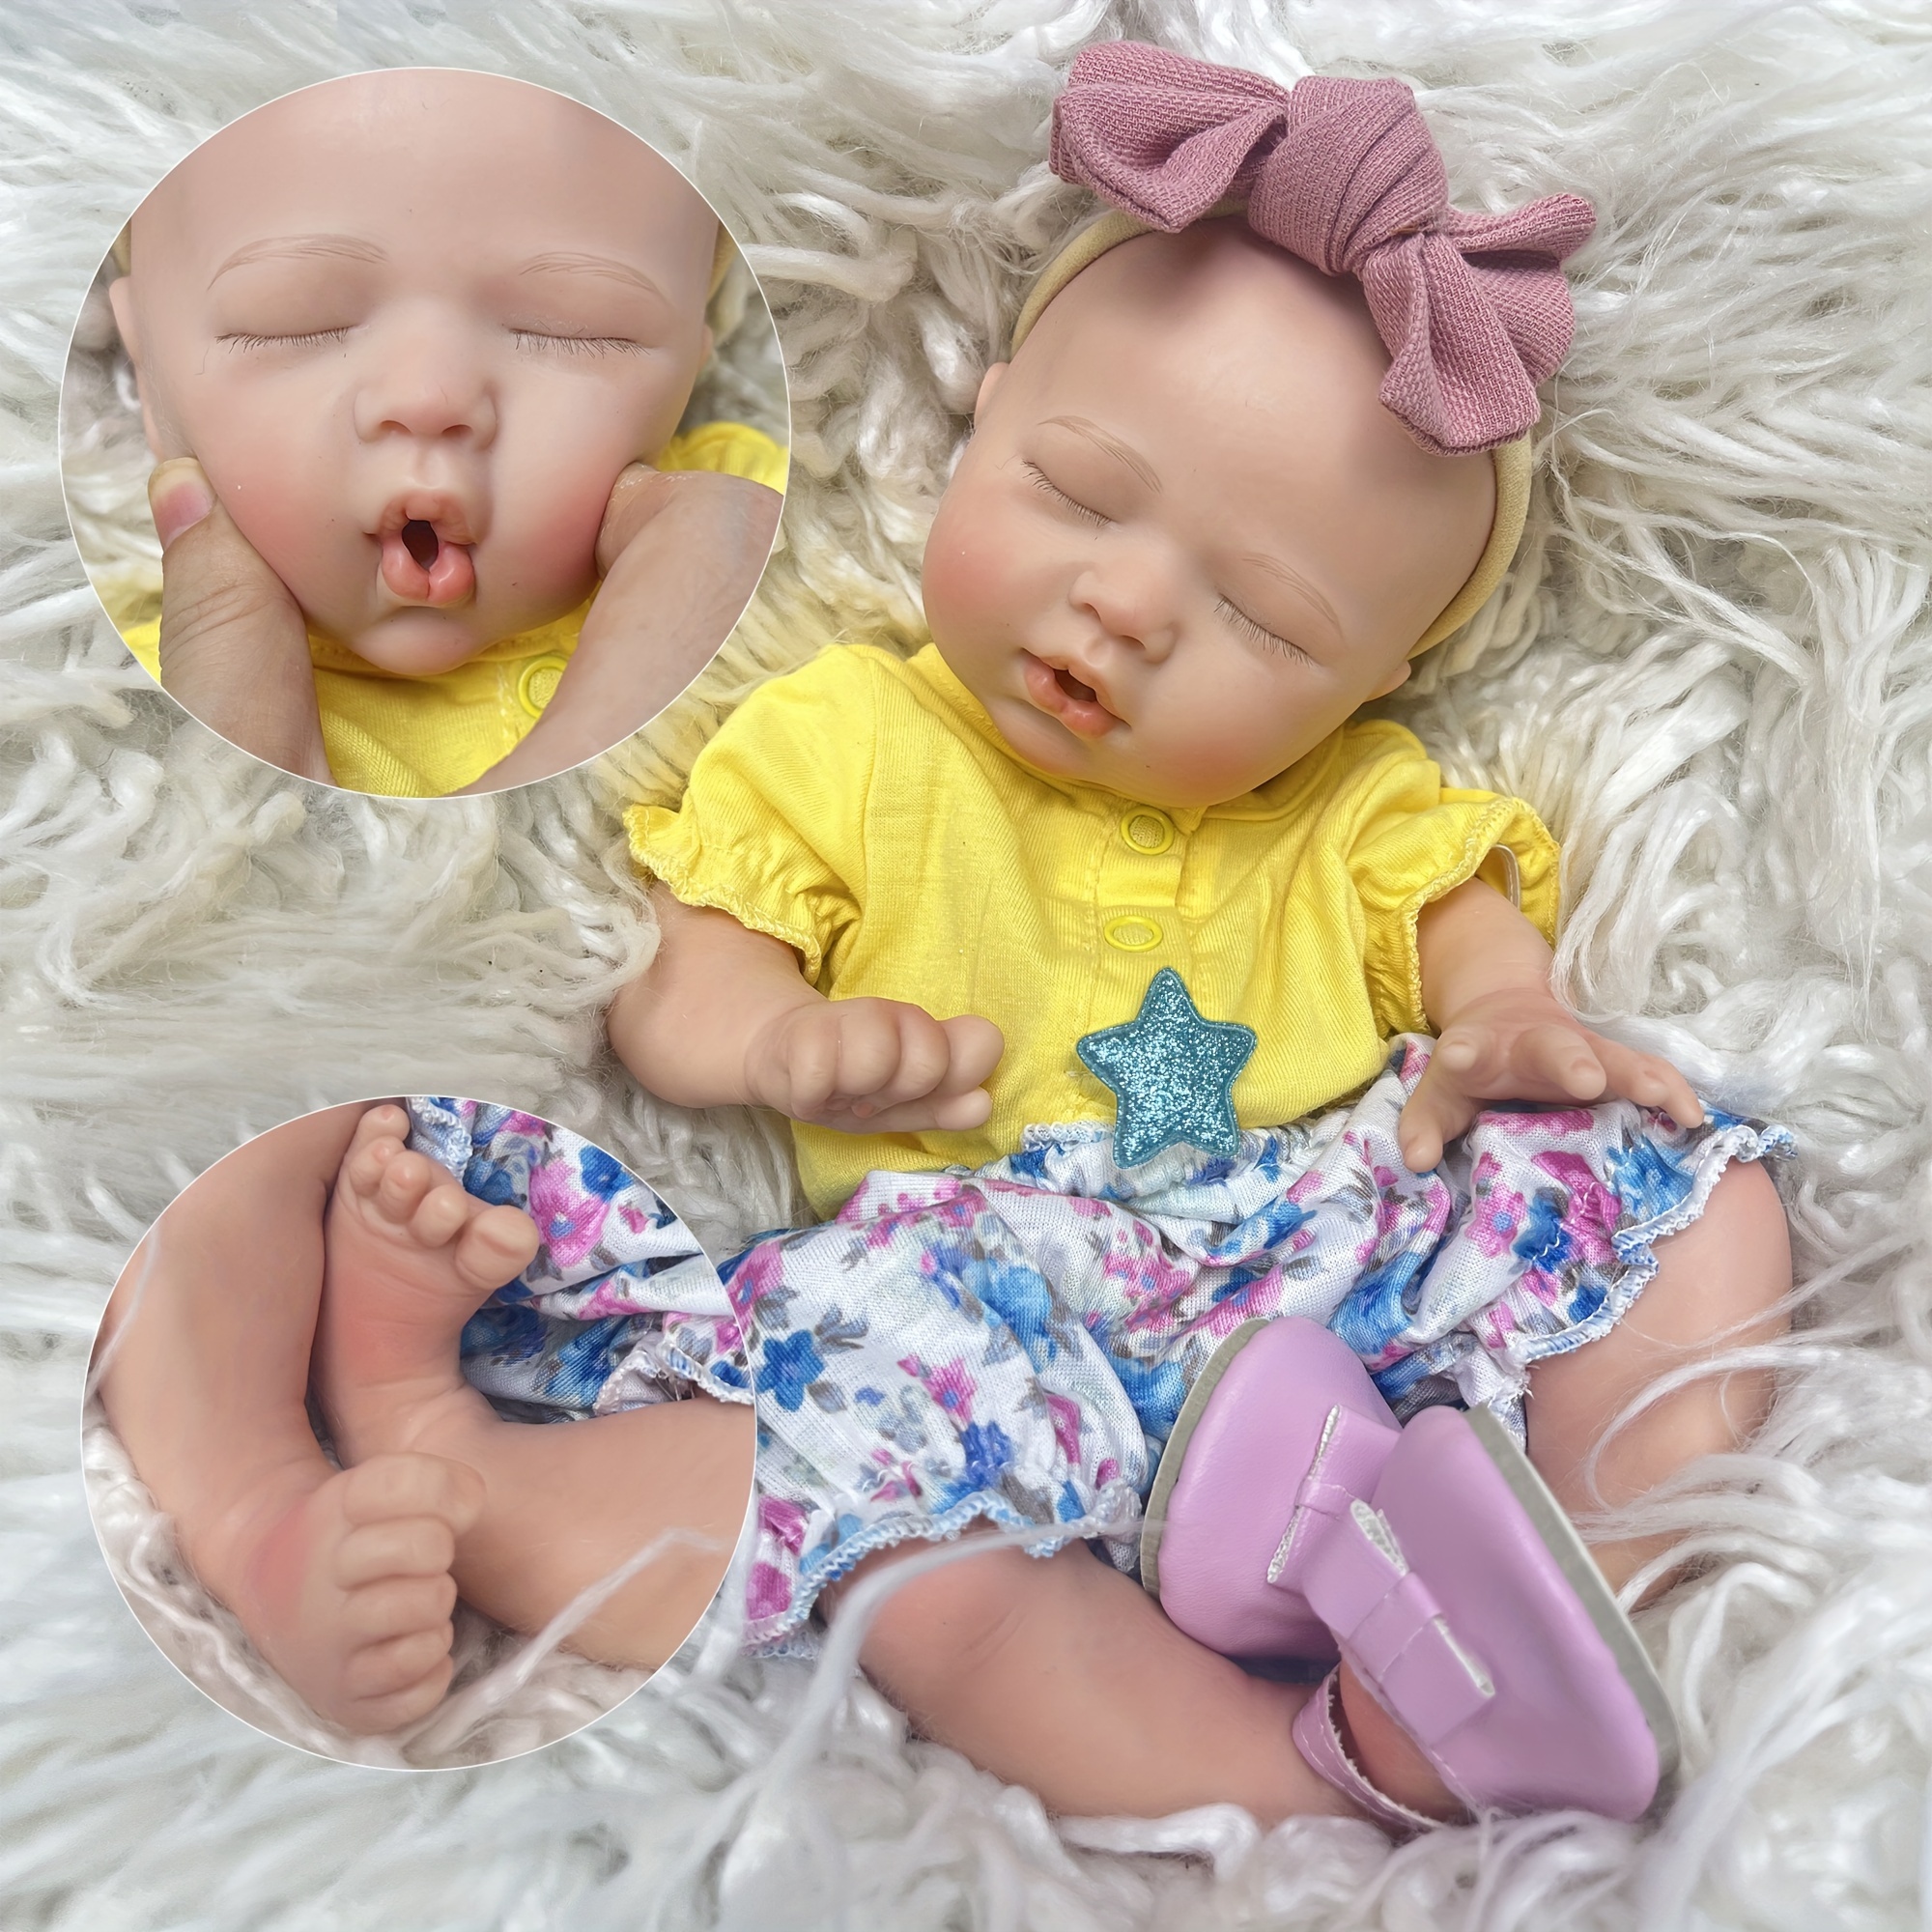 Can Drink Milk Can Pee Silicone Reborn Dolls Soft Full Body Solid